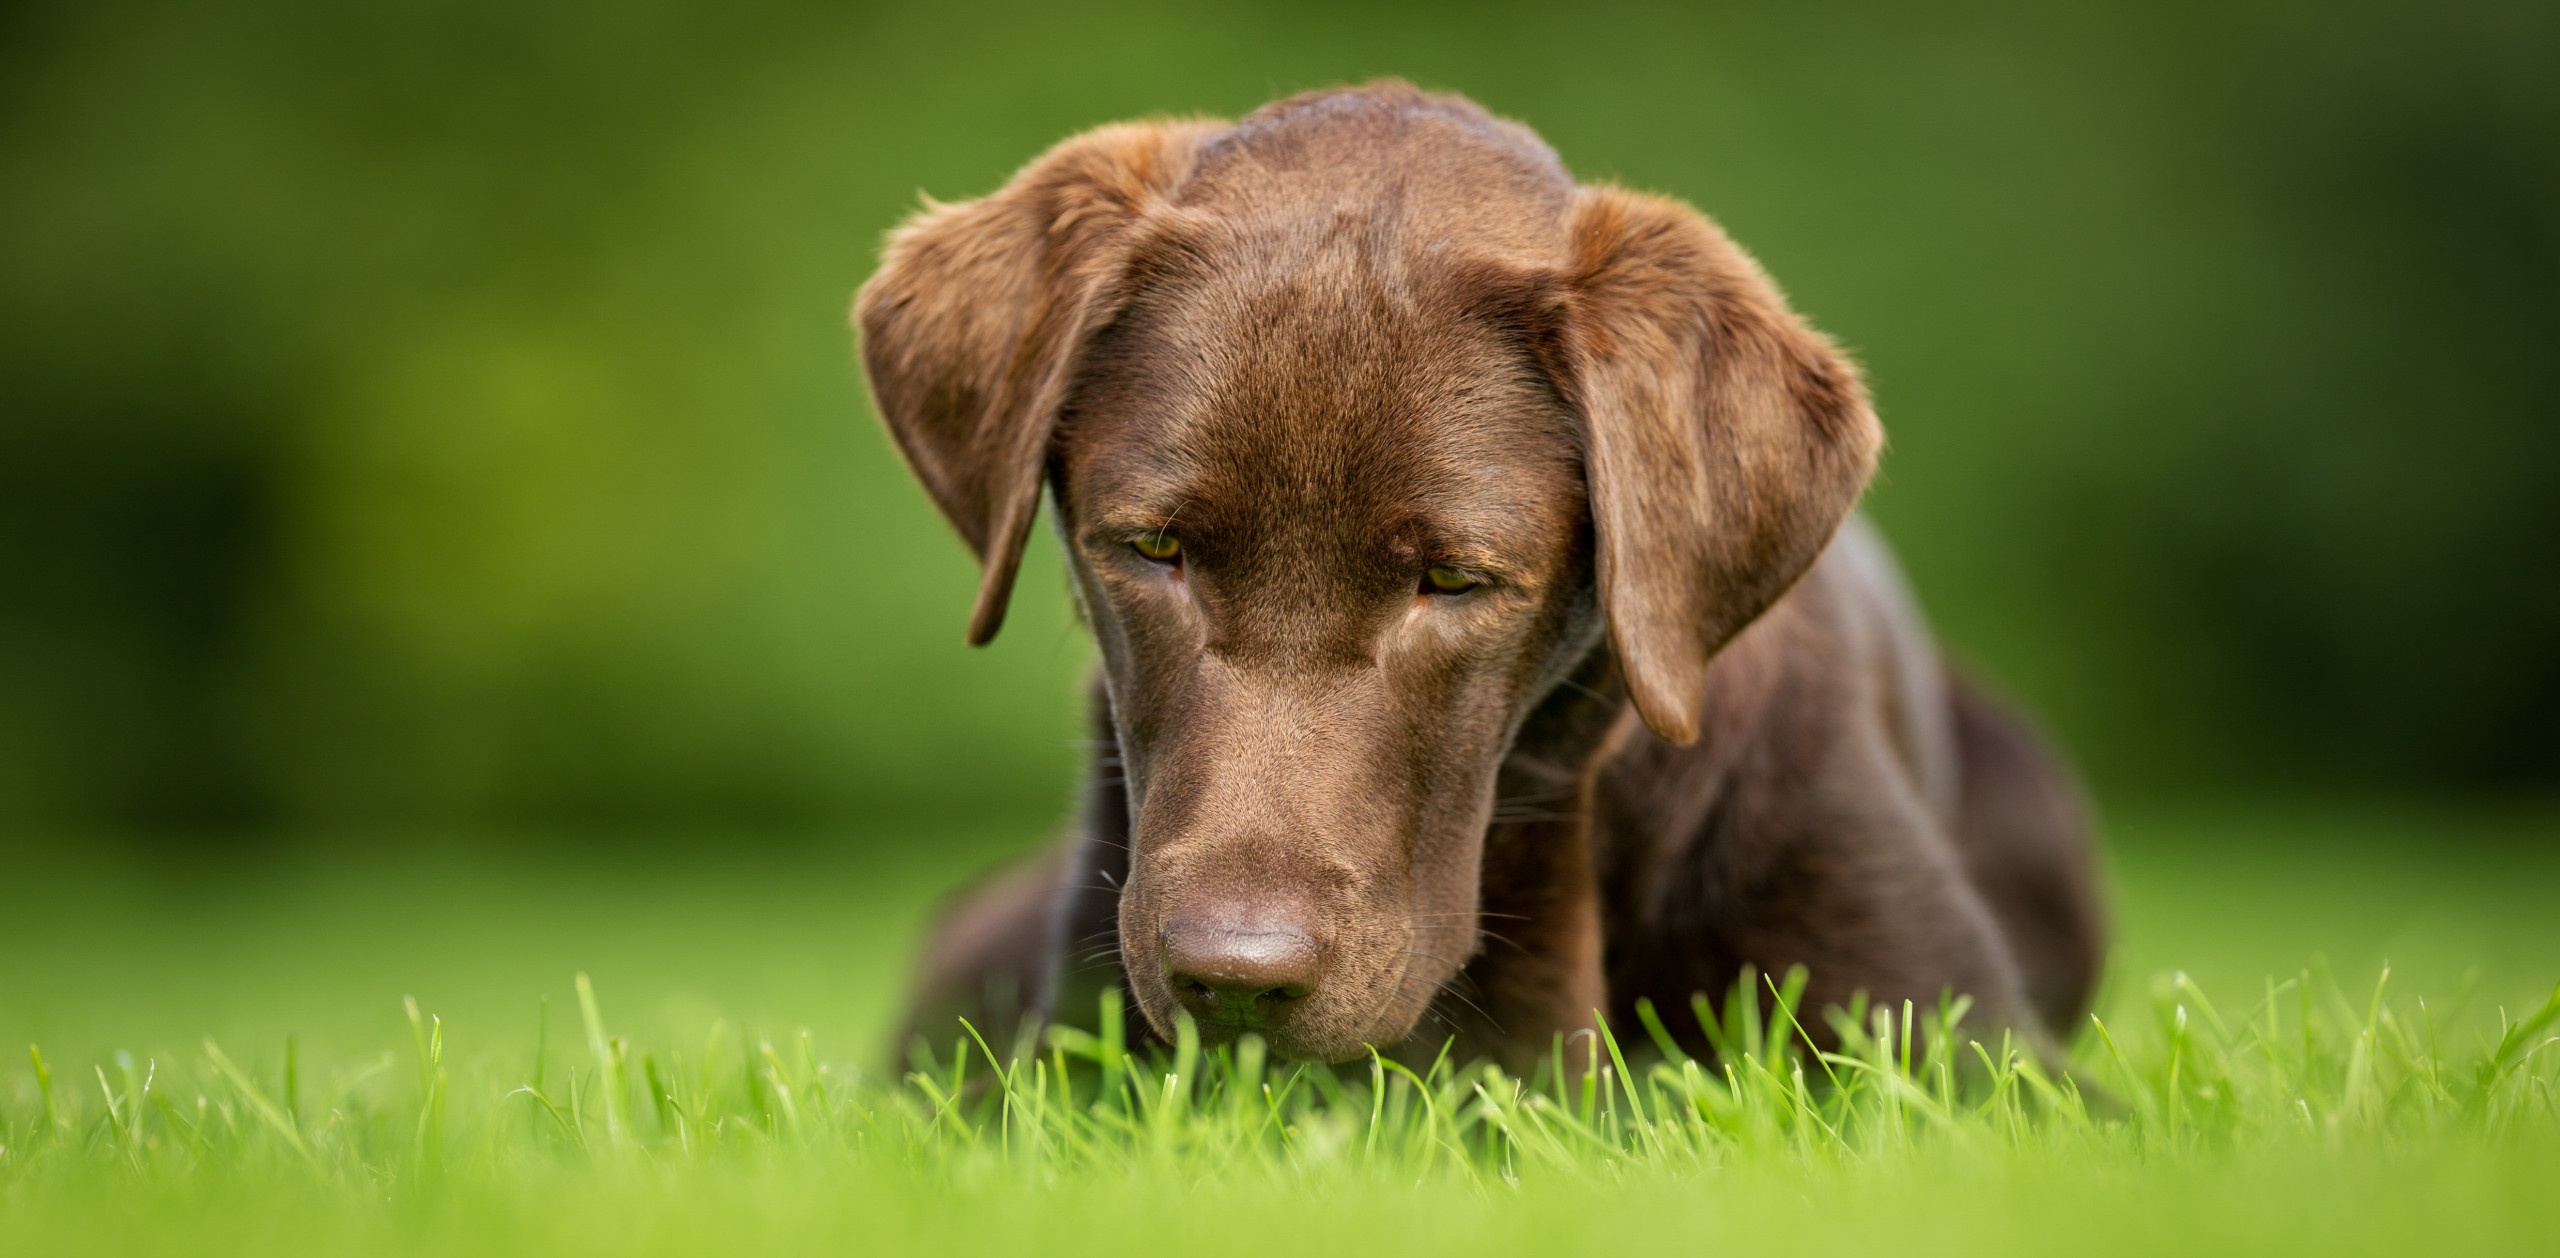 3 Common Household Items That Could Be Lethal to Your Dog